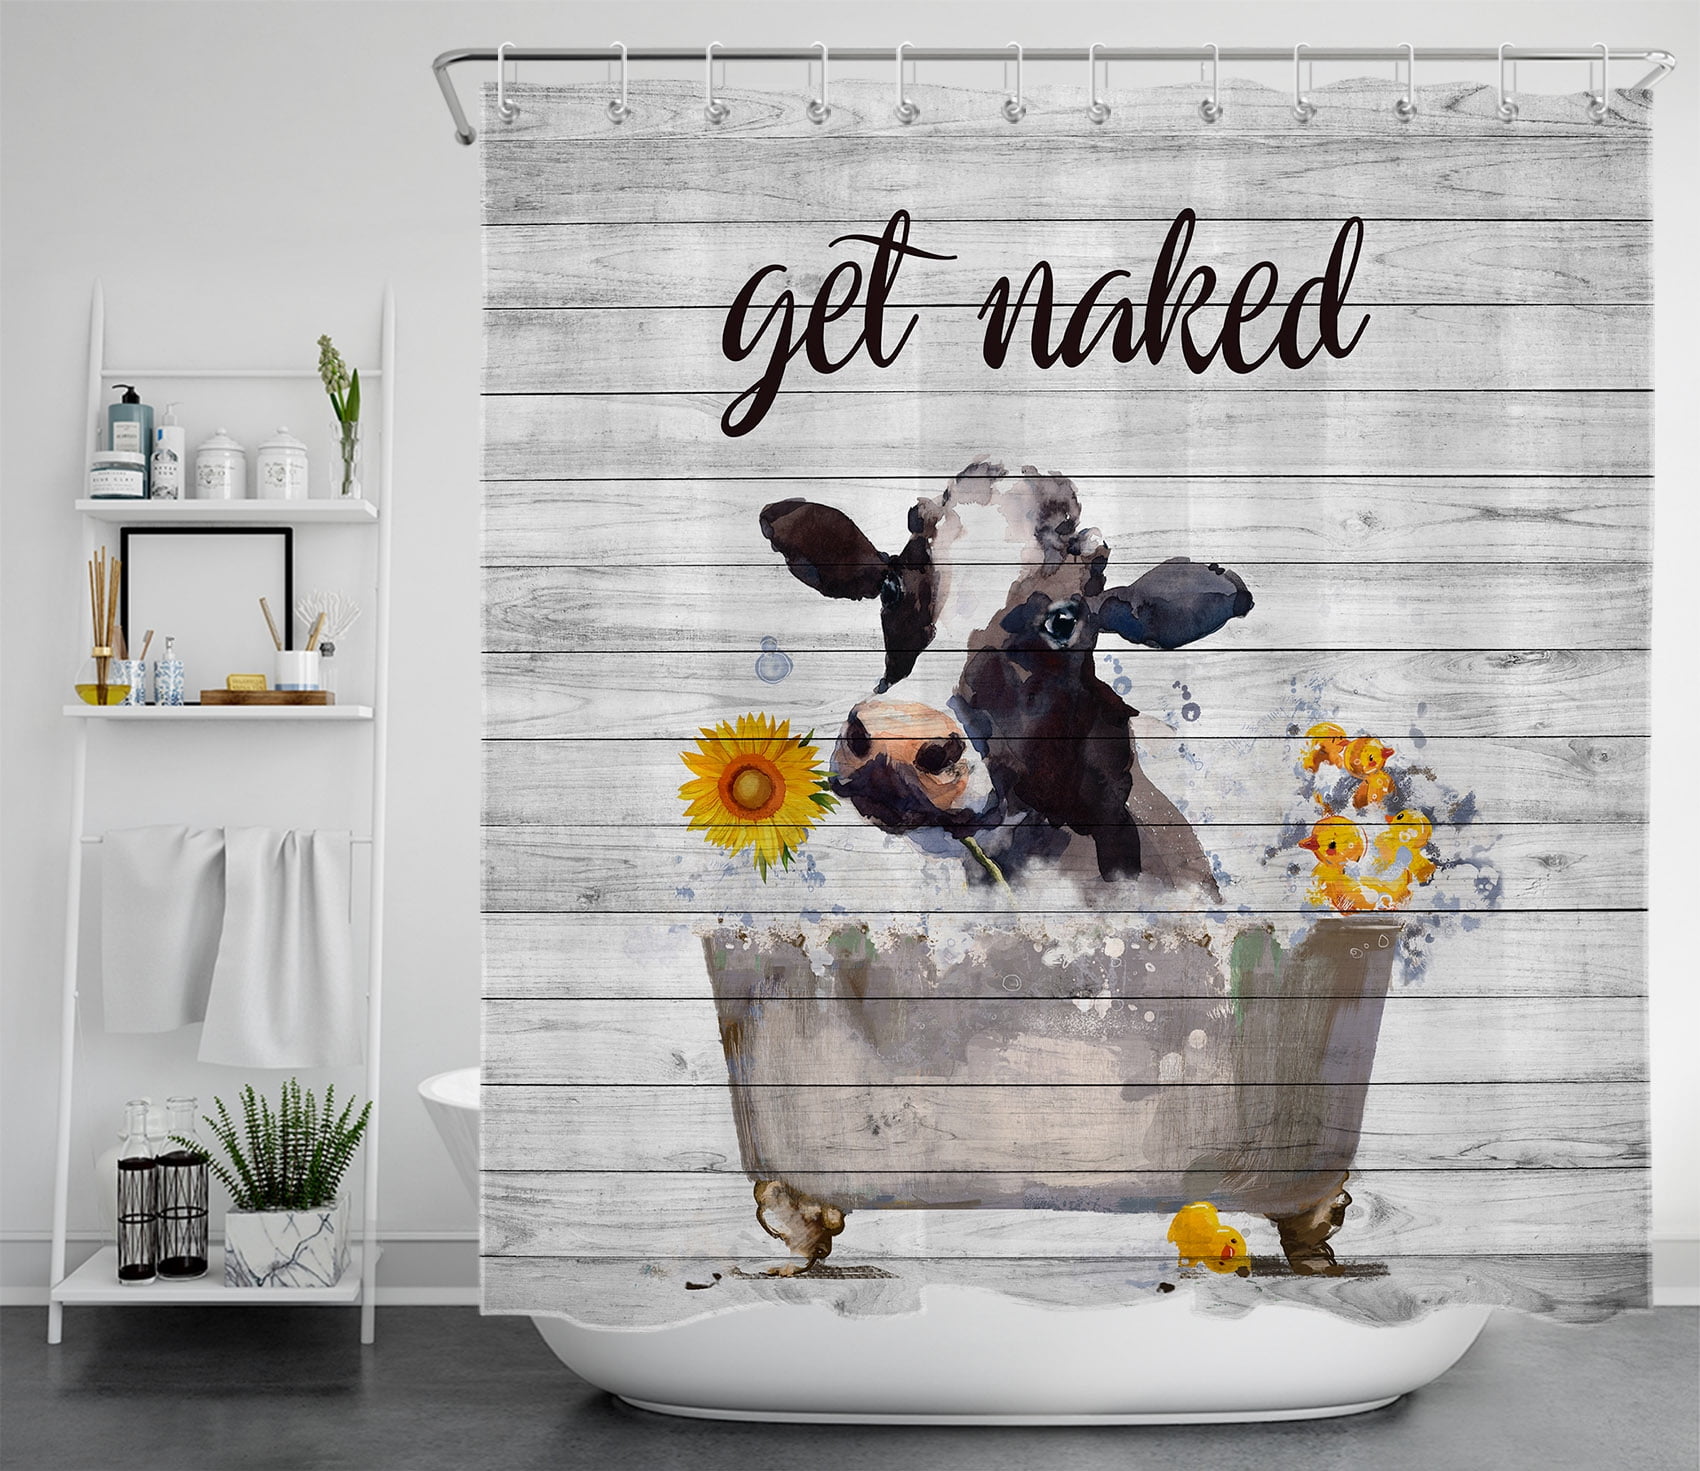 Get Naked Shower Curtain Funny Highland Cow with Sunflowers For Bathroom Decor 